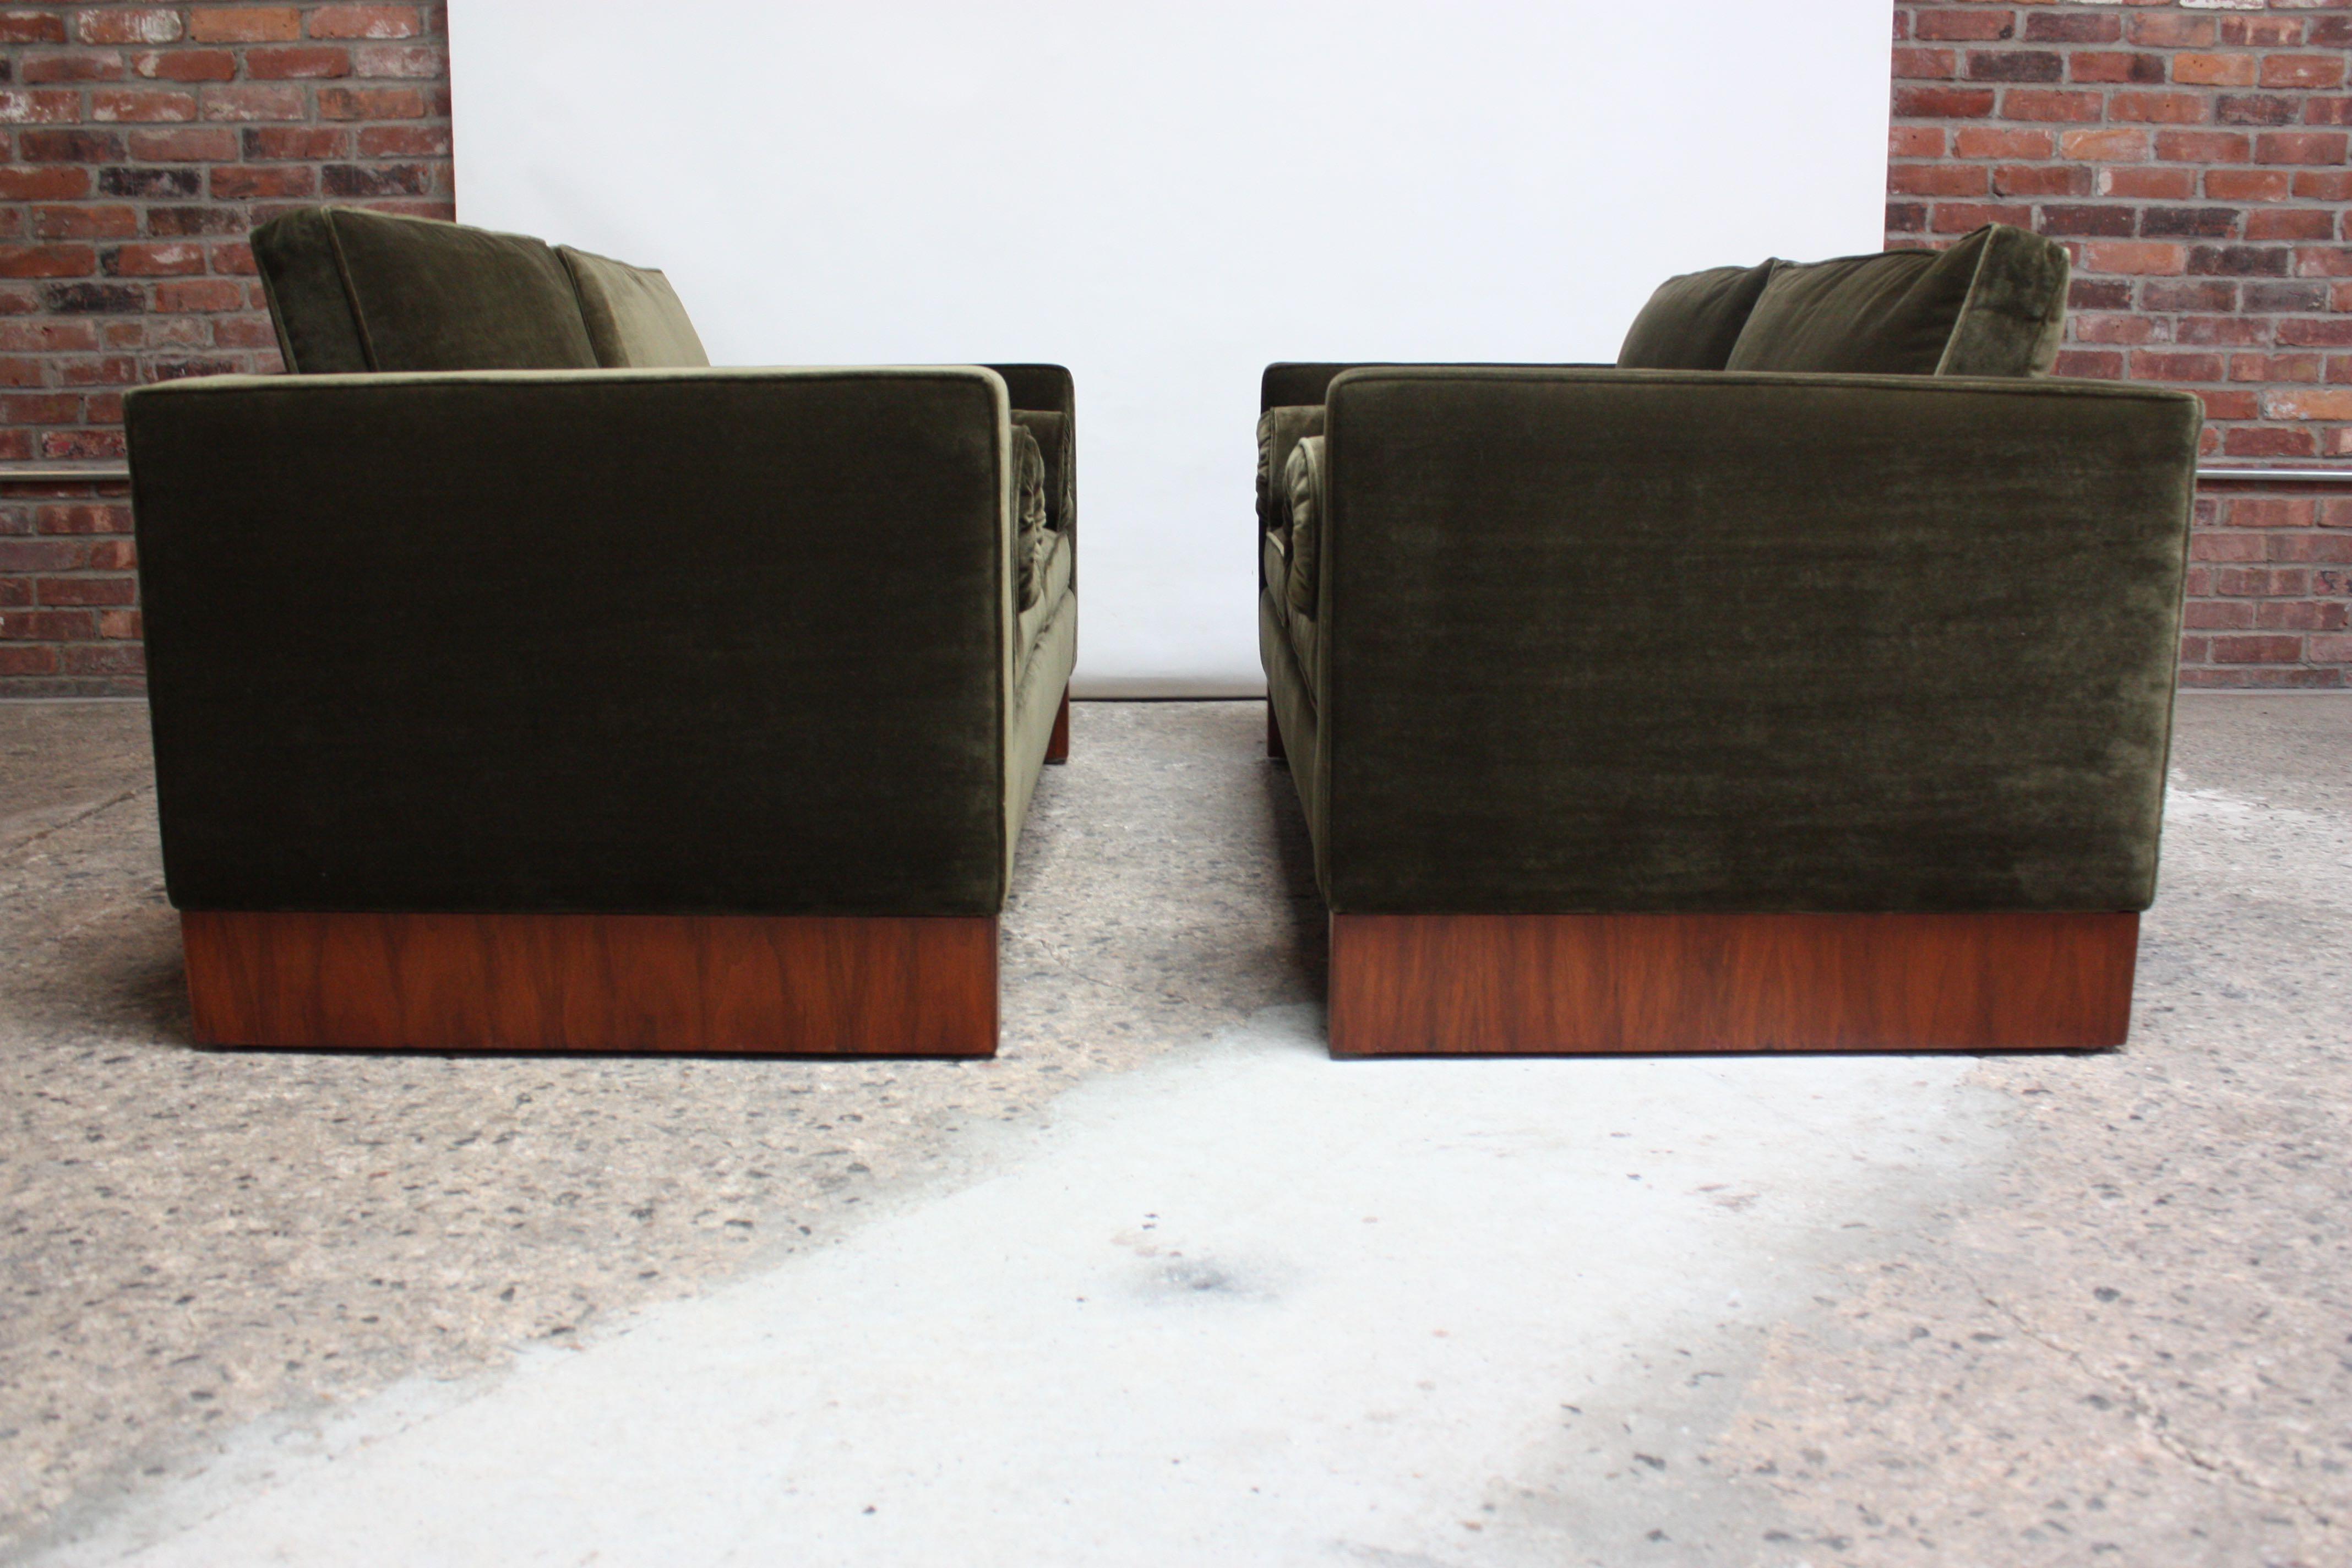 (One sold, one available): Rare Ludwig Mies van der Rohe for Knoll International settee (circa 1960) composed of dual teak plinth bases which support a newly reupholstered olive green velvet frame with corresponding bolsters. Hand-sewed details /